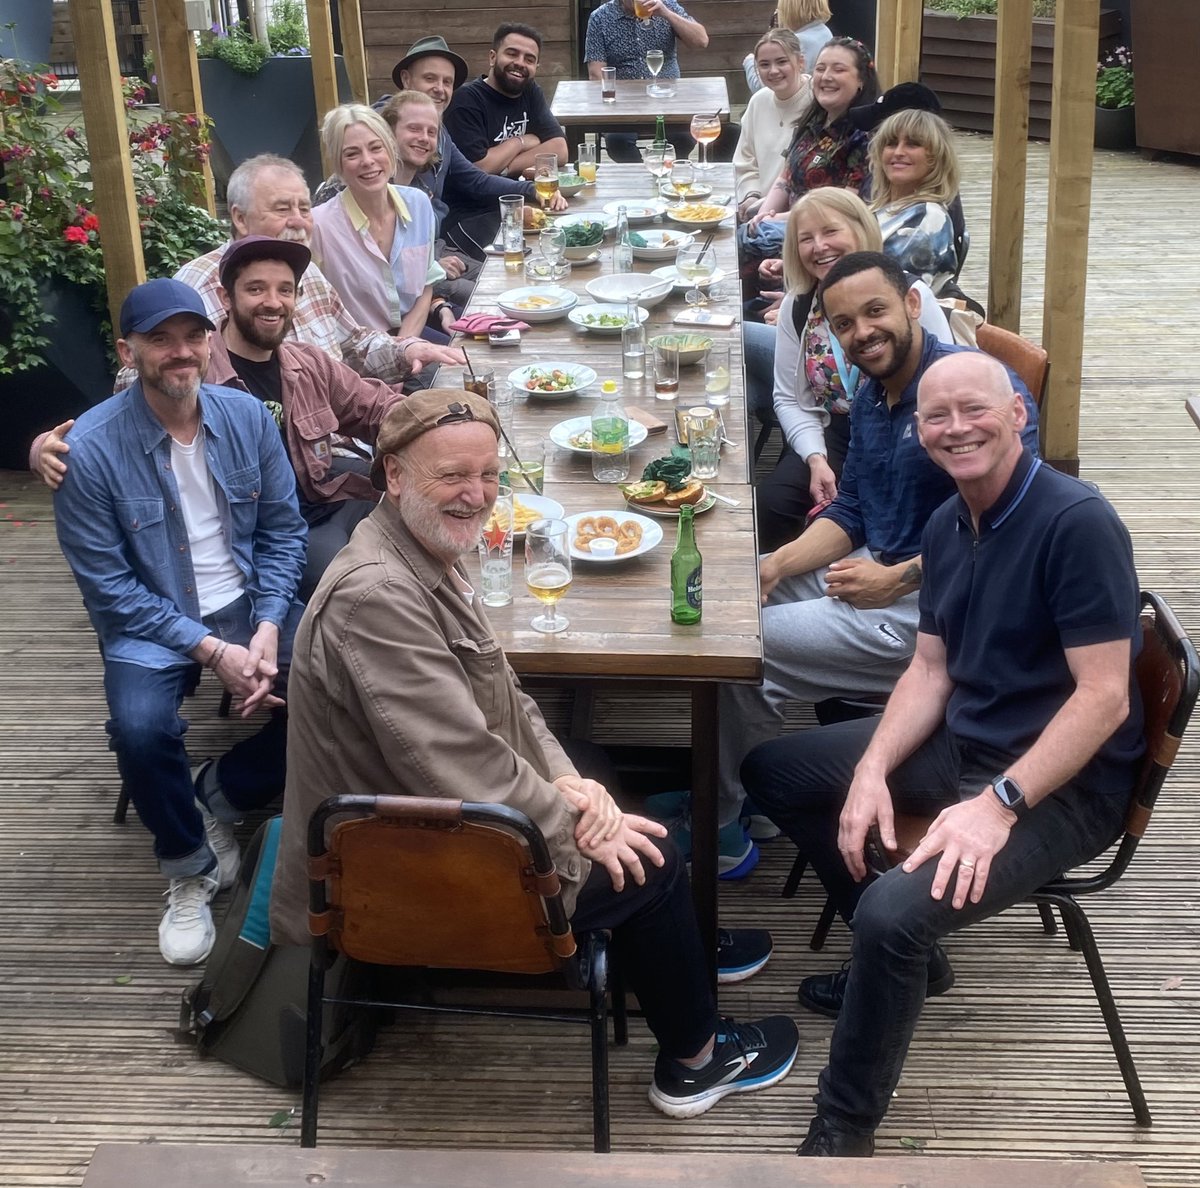 A great evening spent yesterday with some of our friends from Boys From The Blackstuff. One last gathering before they head off to The National and The West End 🎭 Wishing you all the best of luck and we will see you down there 👏👏